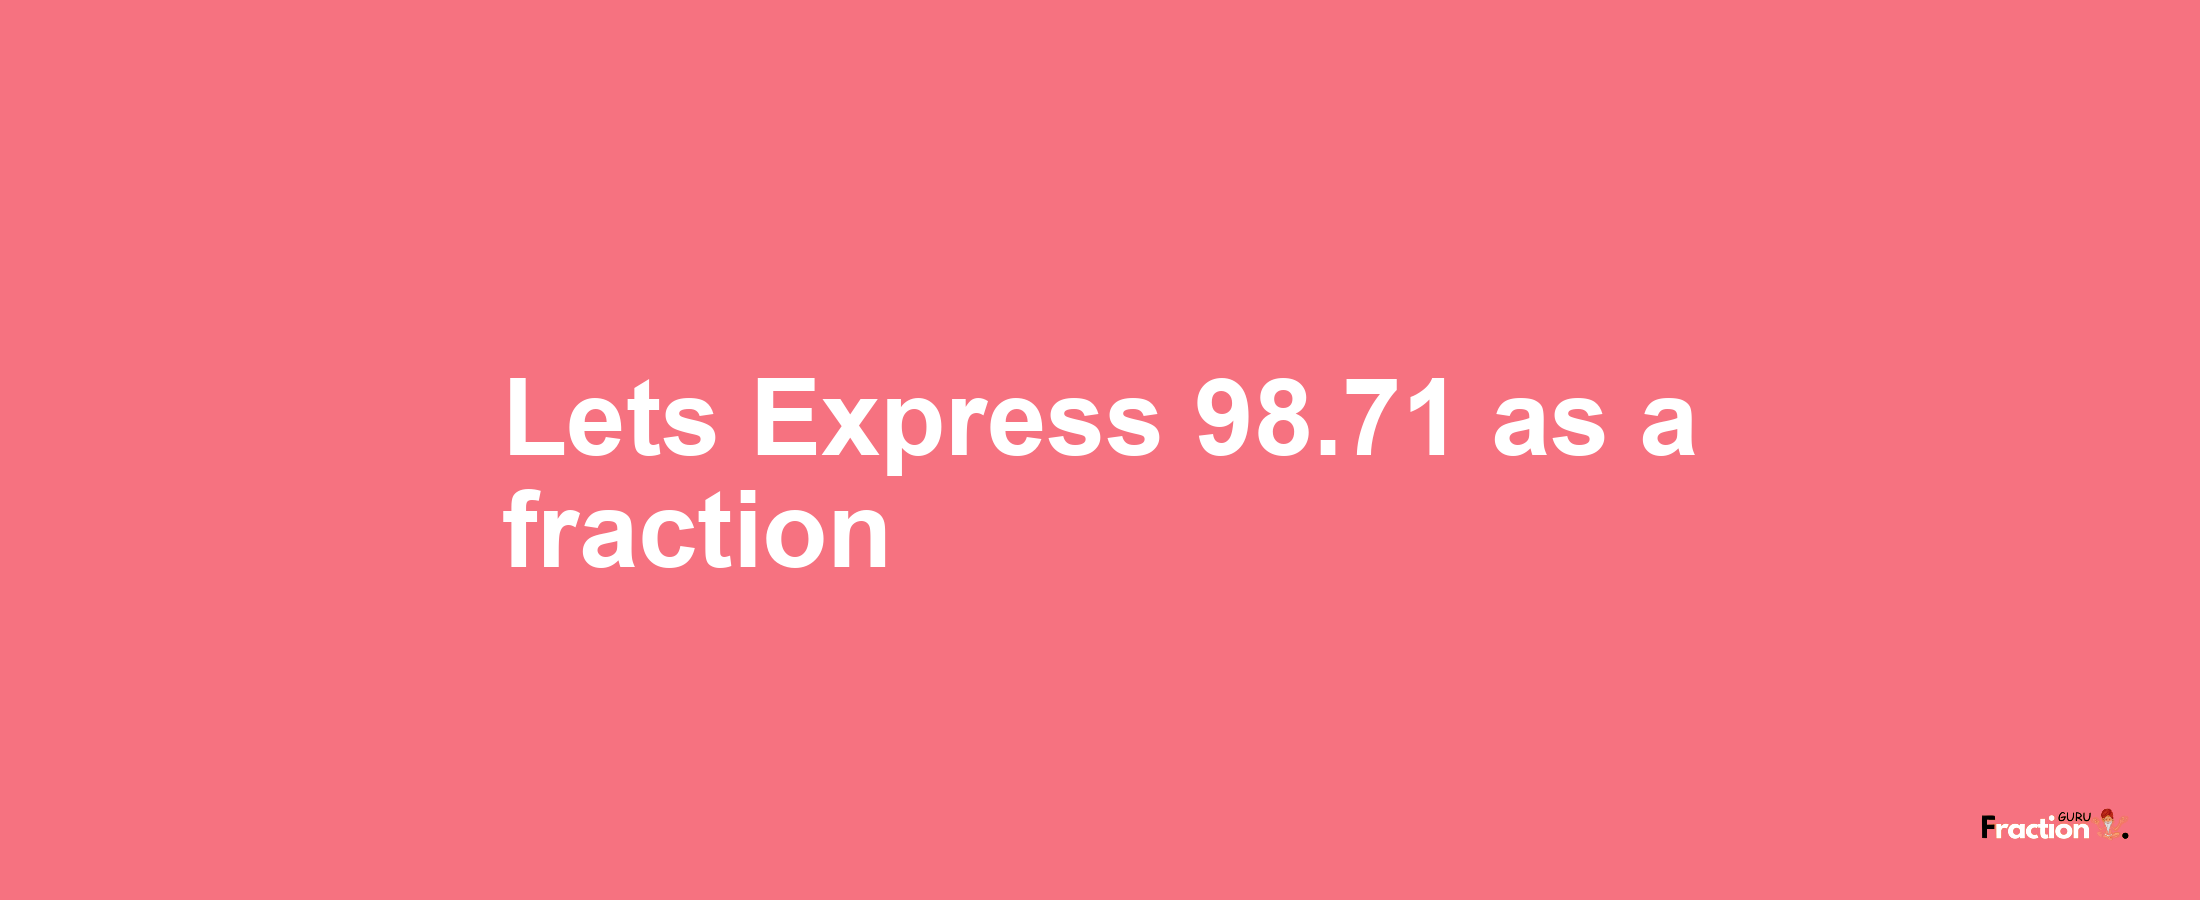 Lets Express 98.71 as afraction